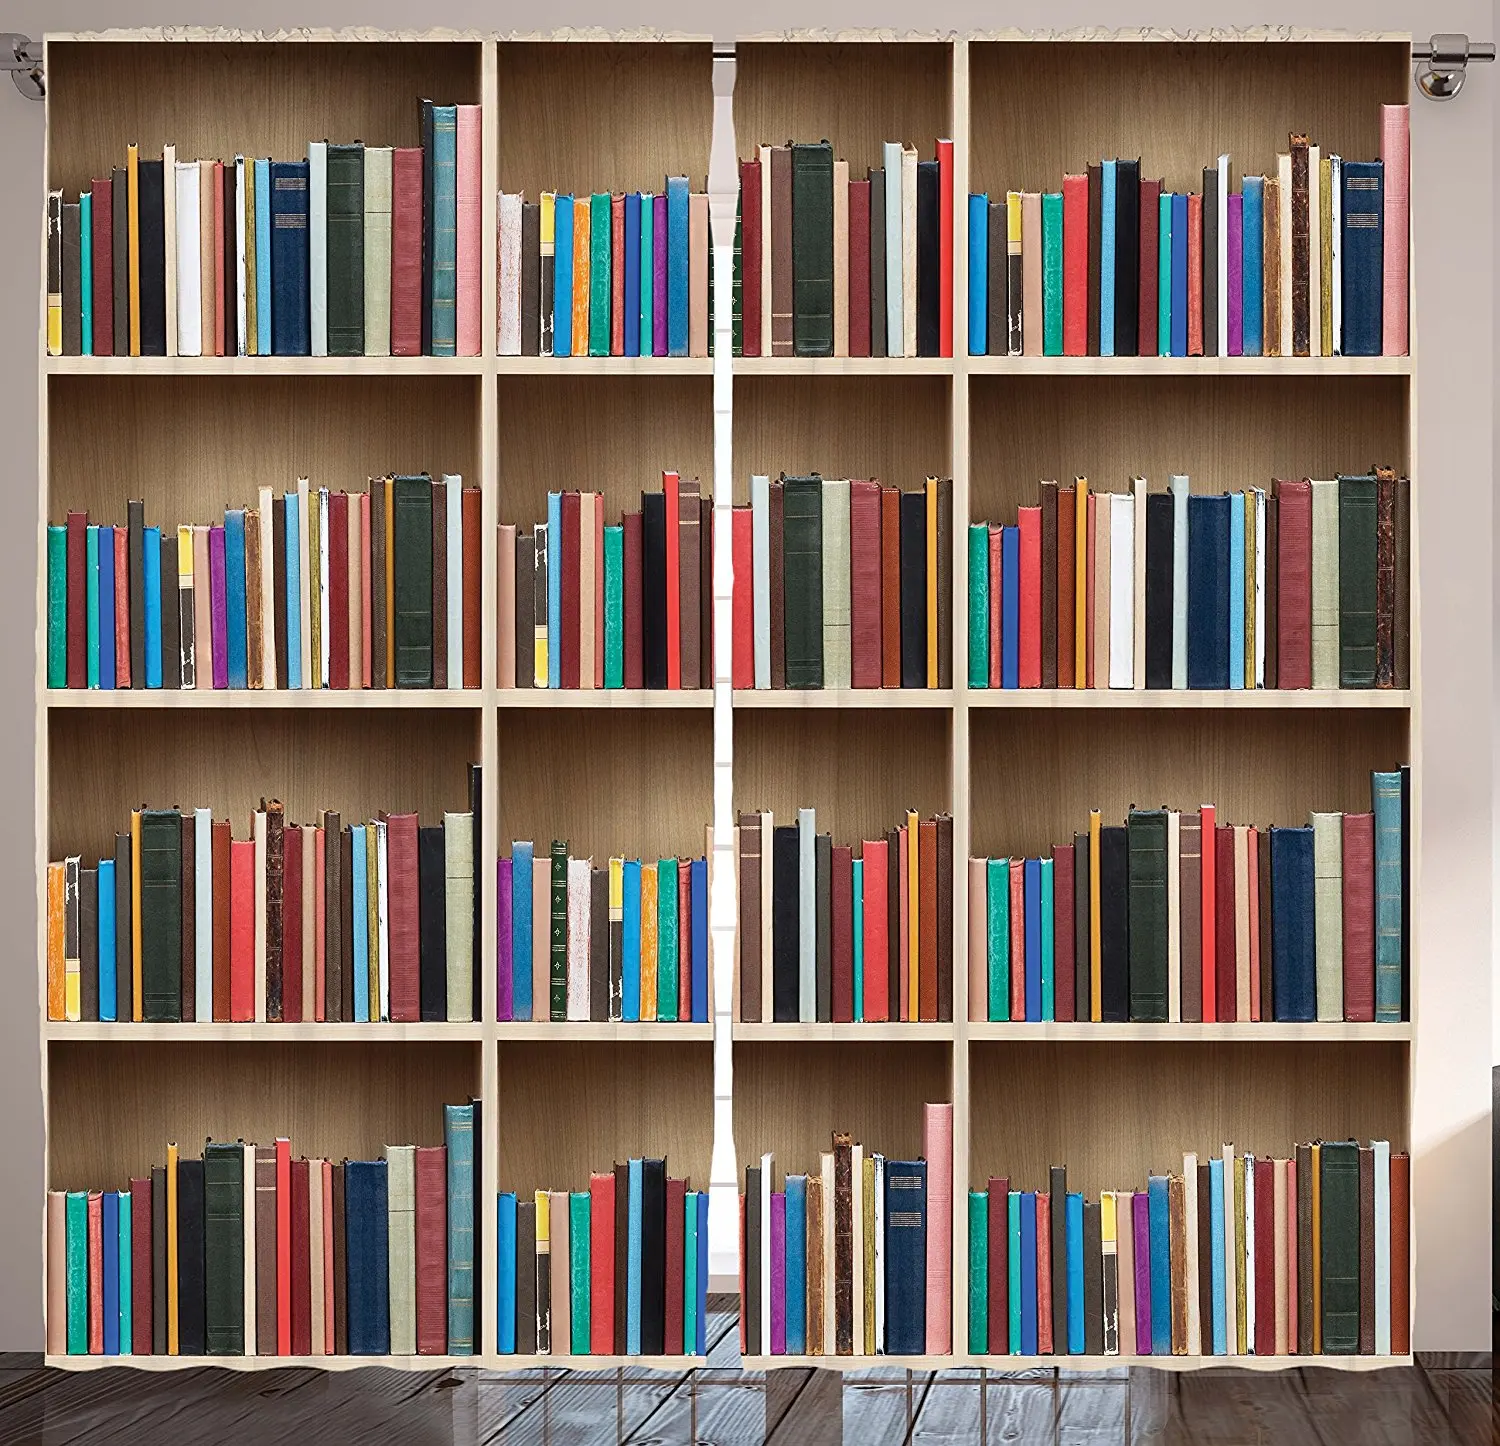 Bookworm library